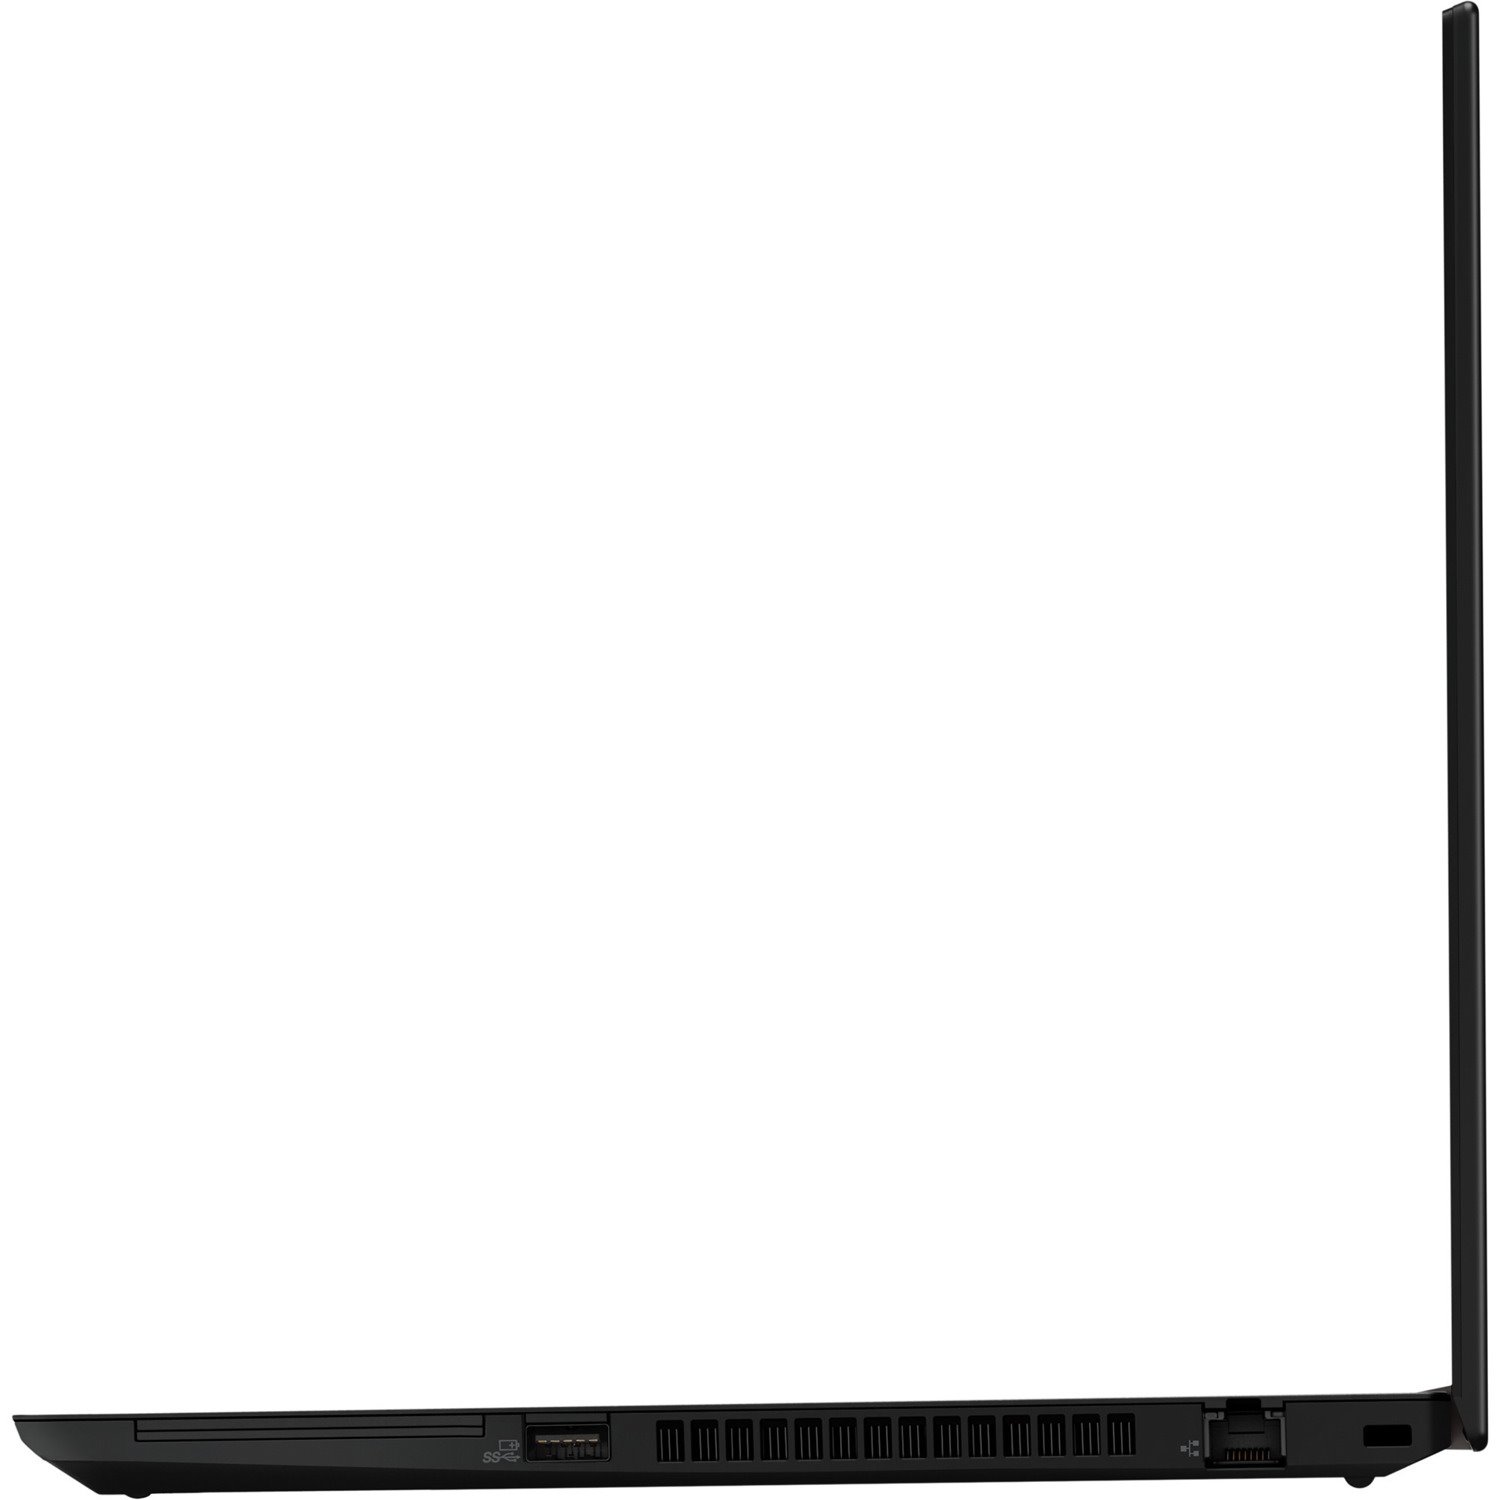 Lenovo ThinkPad T14 Gen 2 20W000T2US 14" Notebook - Full HD - 1920 x 1080 - Intel Core i5 11th Gen i5-1135G7 Quad-core (4 Core) 2.4GHz - 16GB Total RAM - 512GB SSD - no ethernet port - not compatible with mechanical docking stations